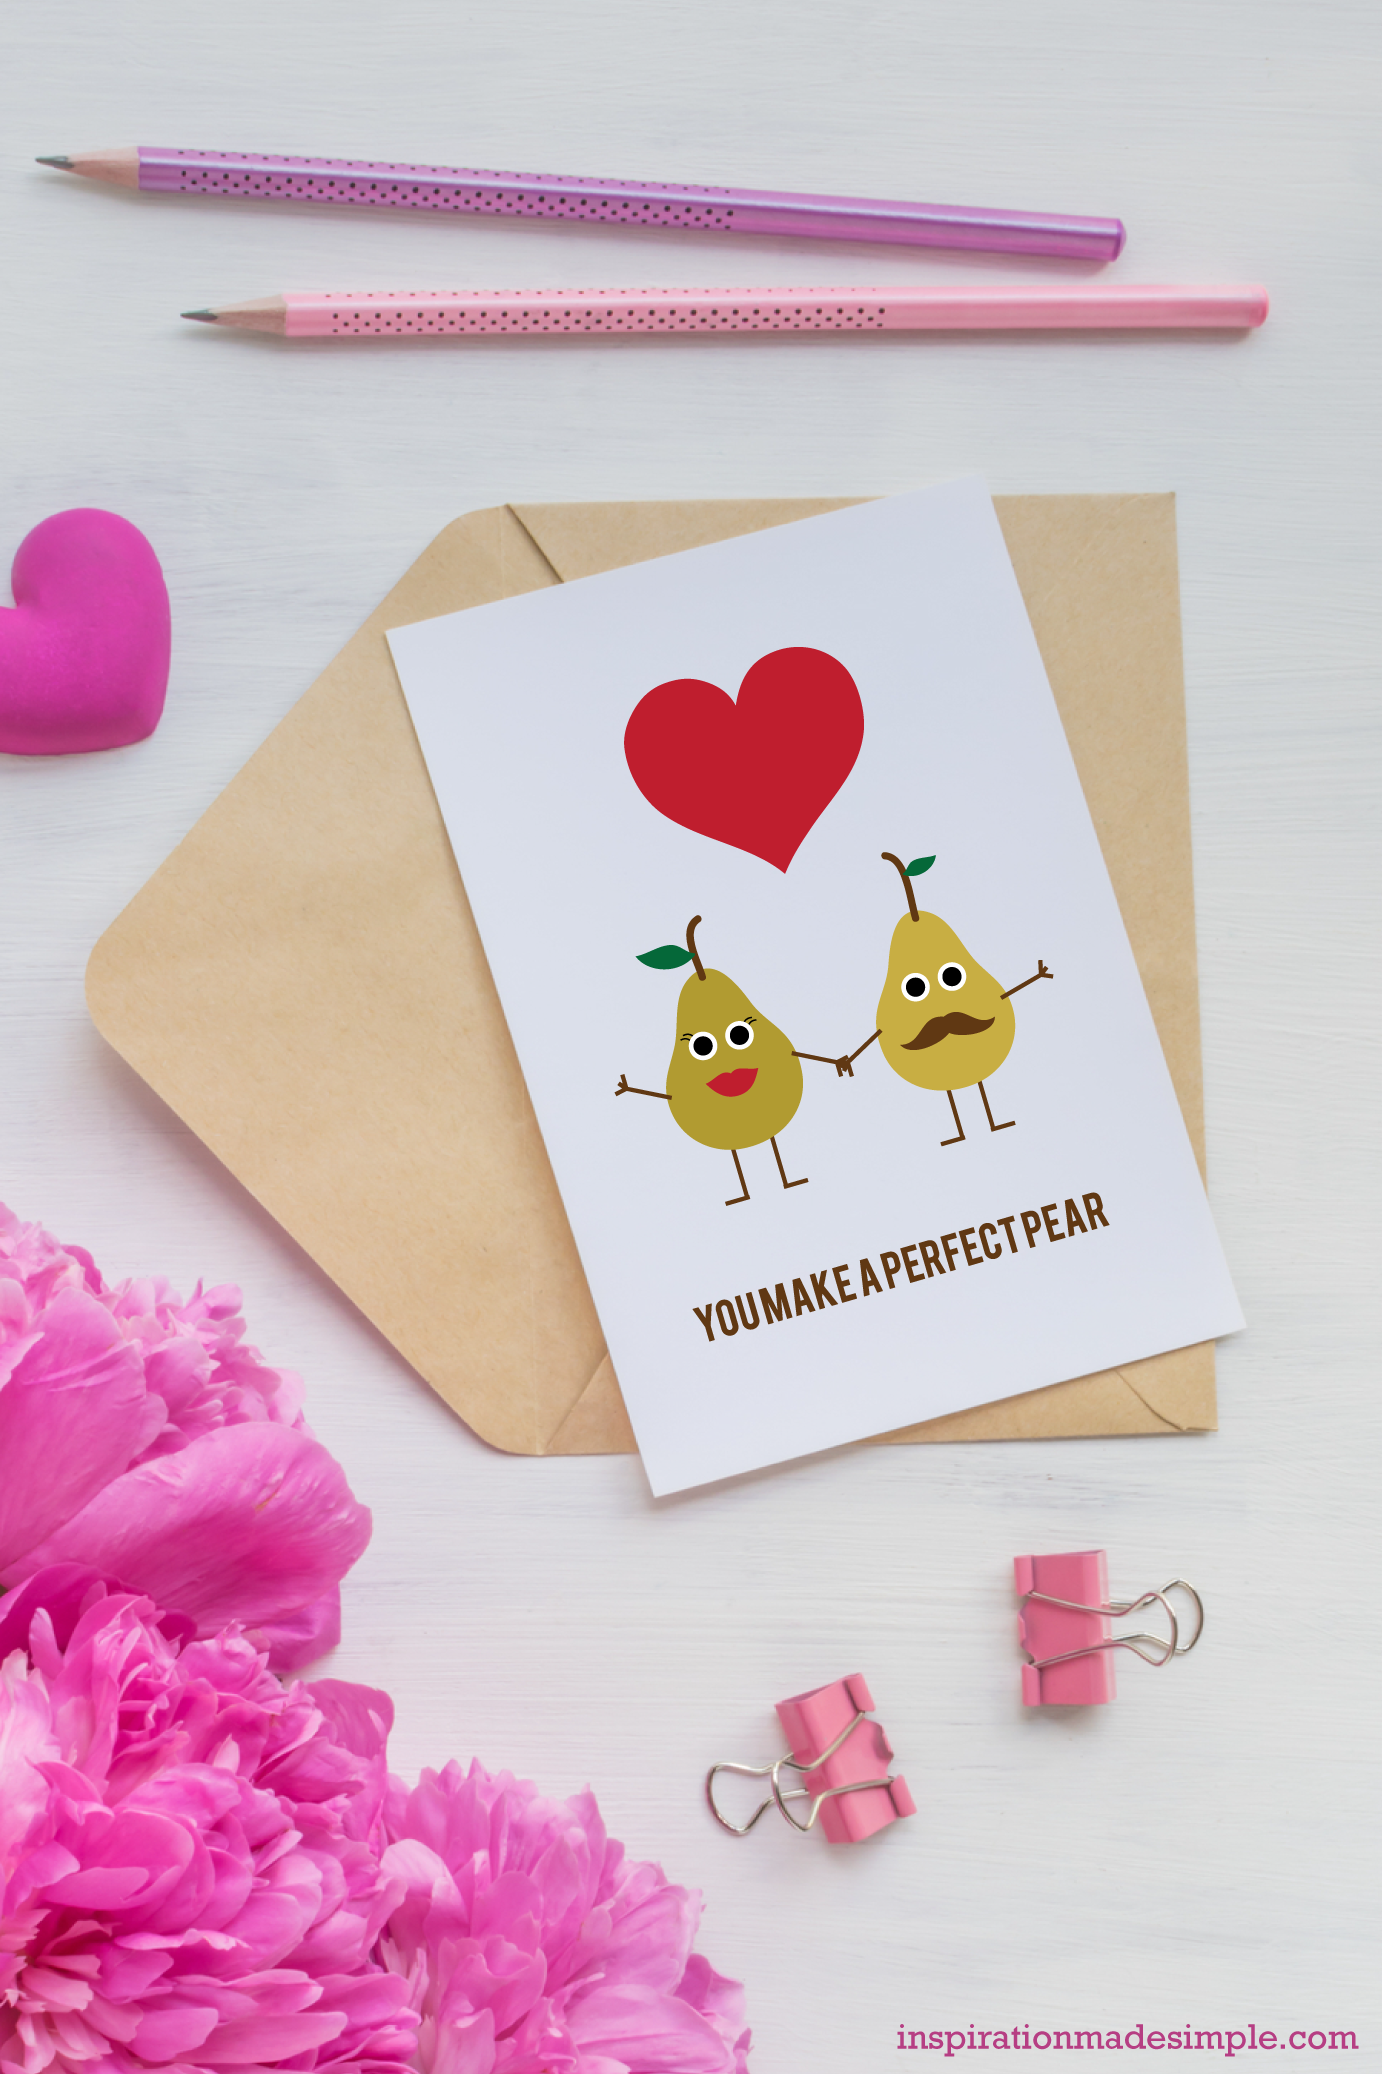 Anniversary Cards and Wedding Cards - Free Printables